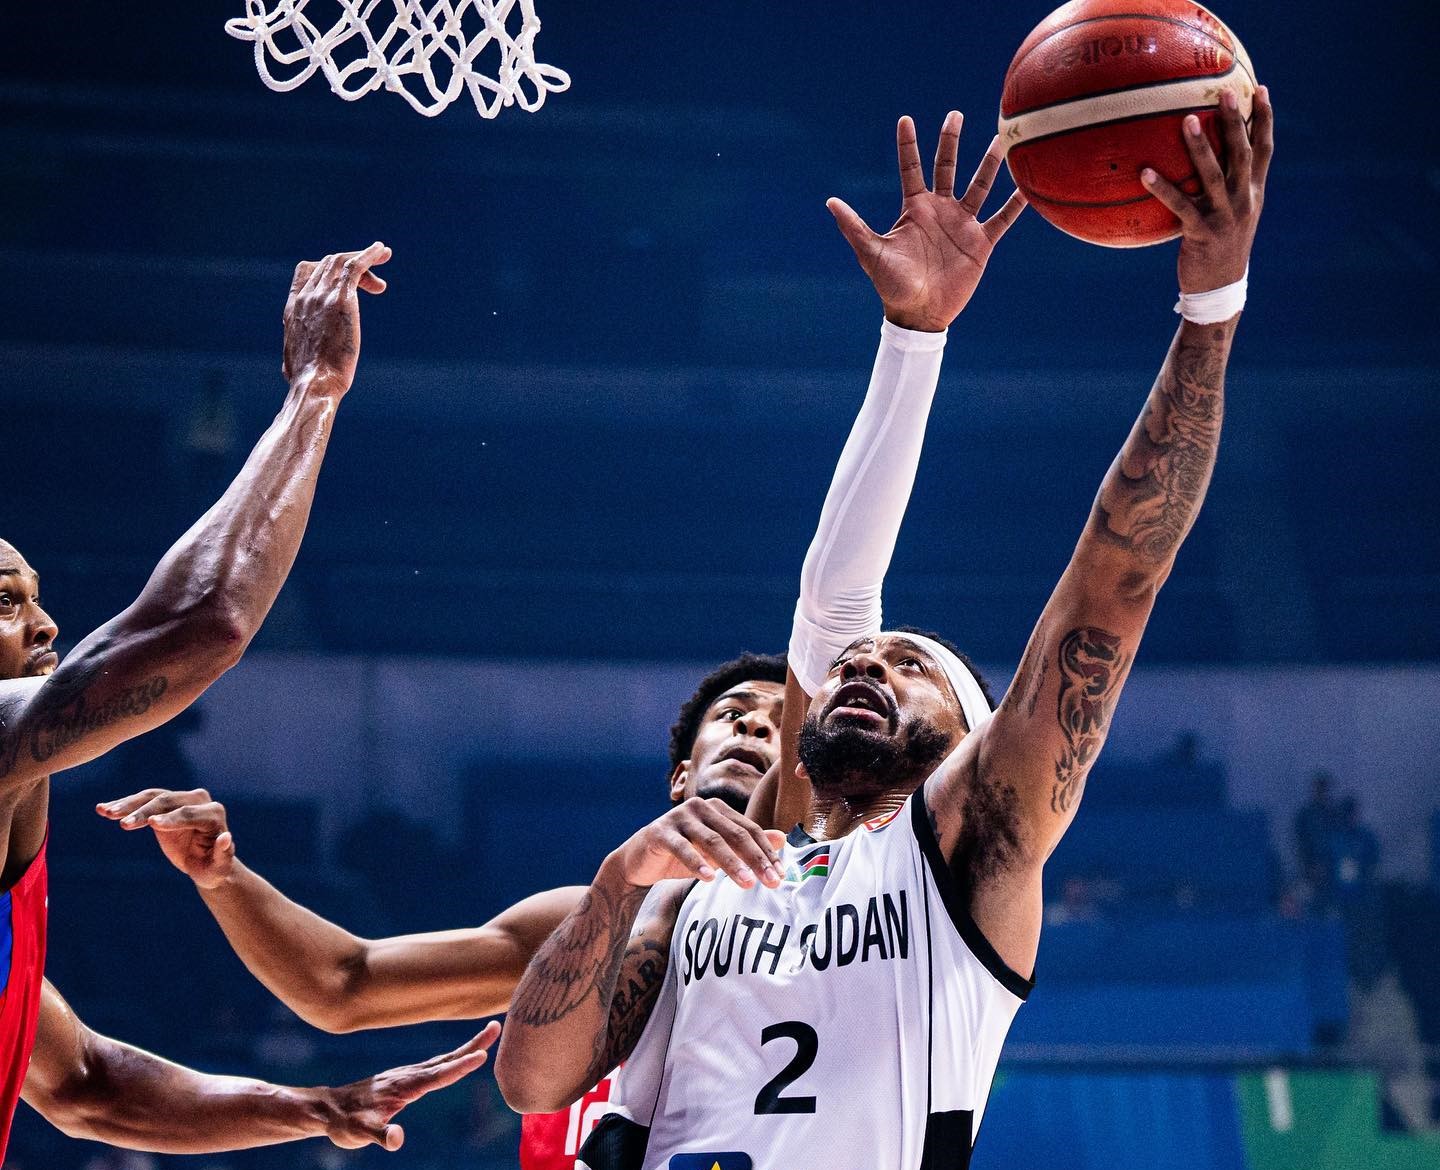 South Sudan Encounter a Heartbreaking Loss Against Puerto Rico in an Overtime